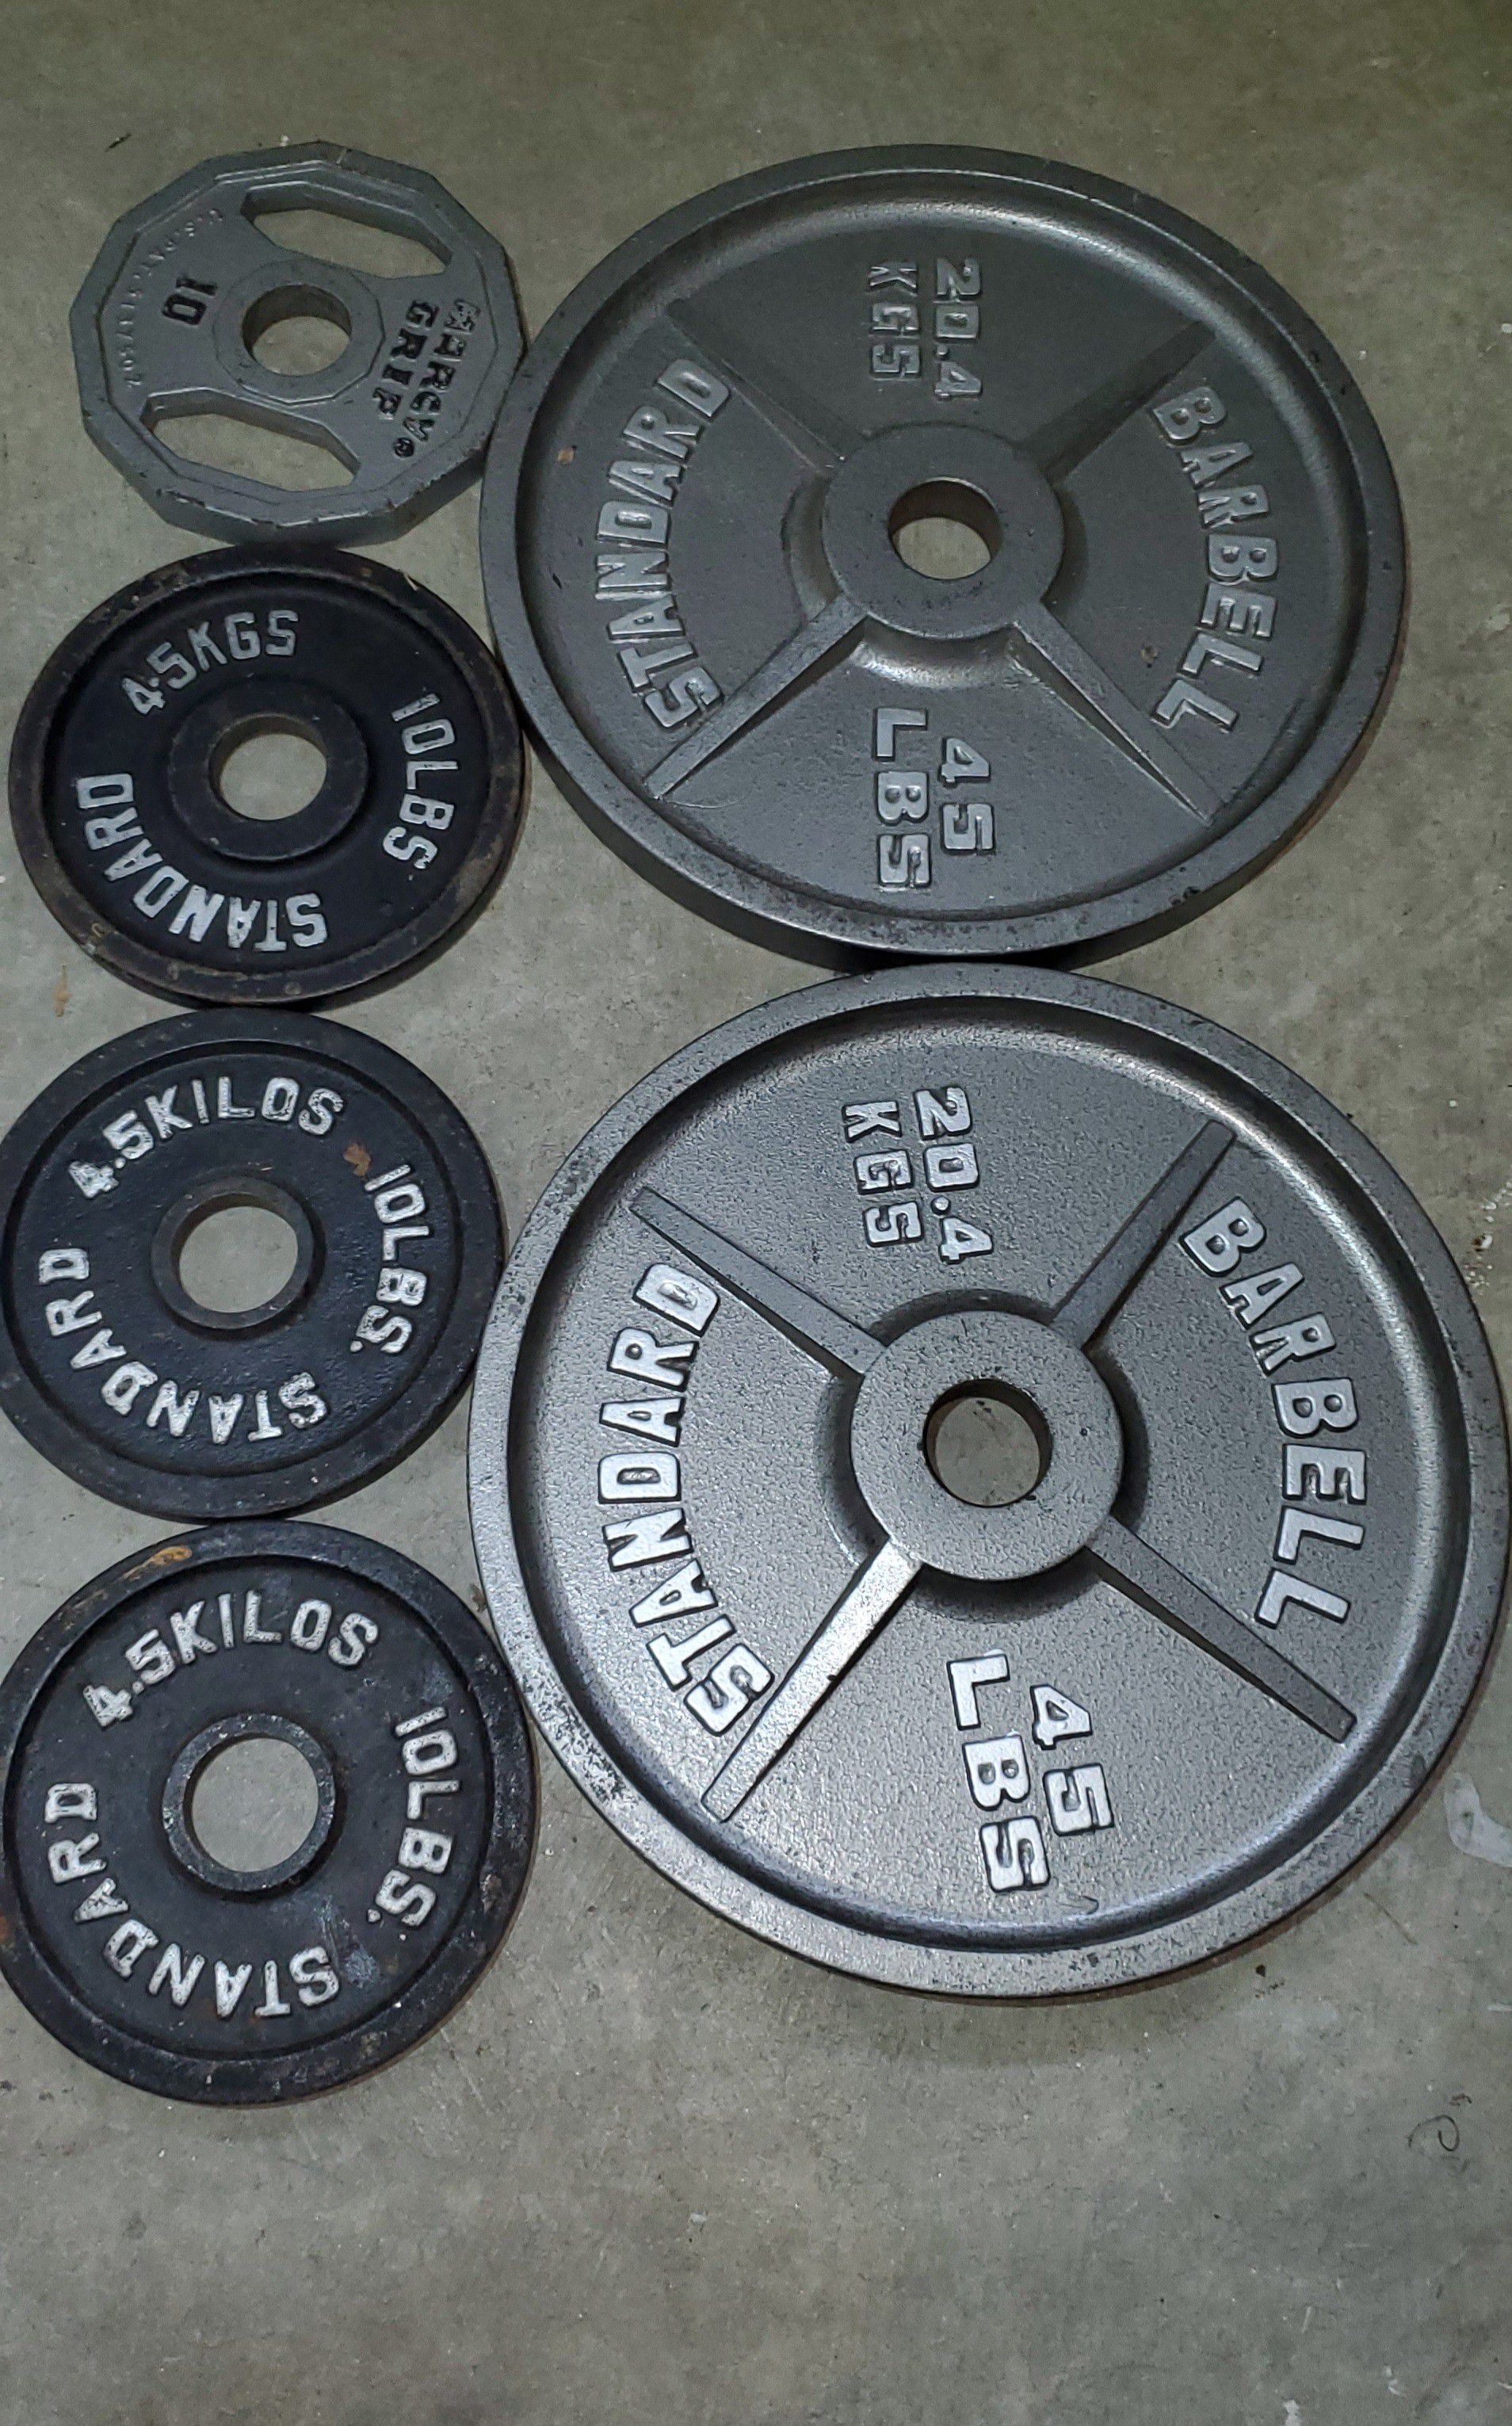 Olympic Weight plates 45lb (2) and 10lb (4)